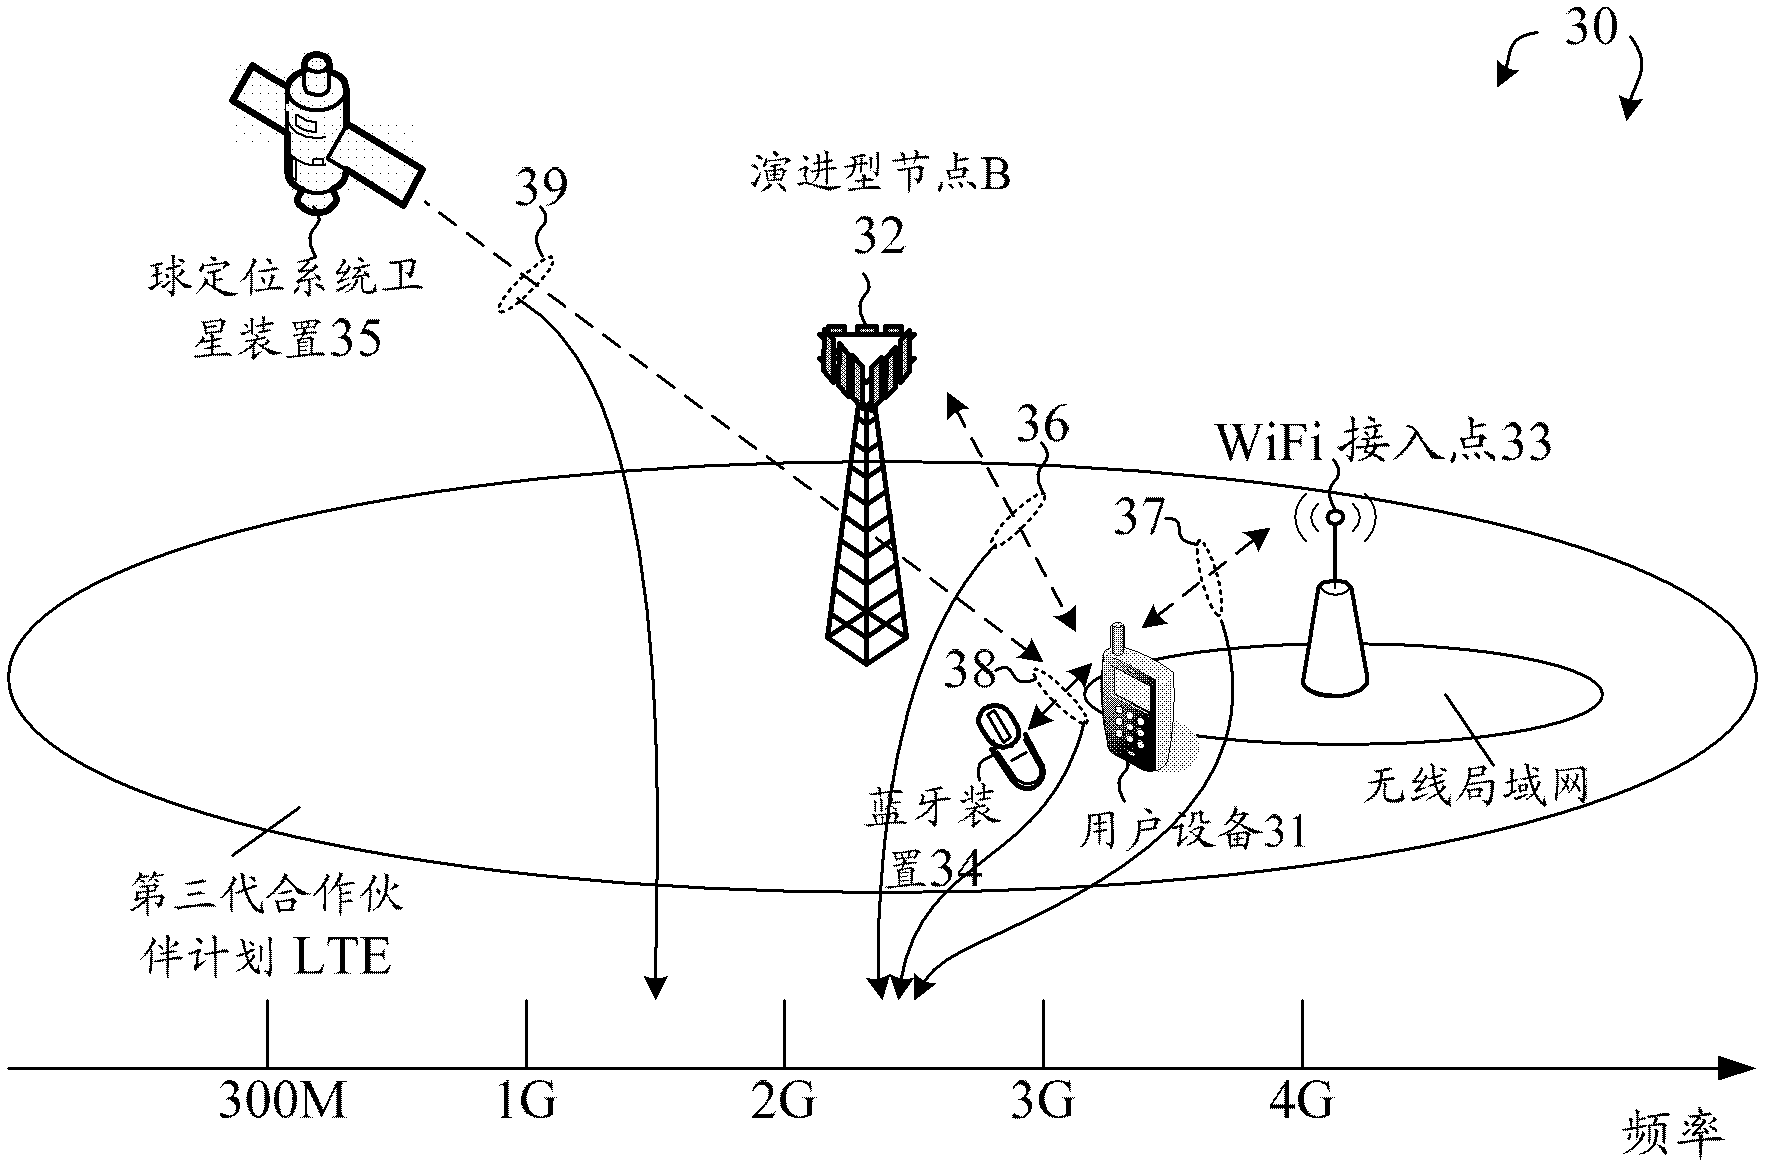 Method of in-device interference mitigation for cellular, bluetooth, wifi, and satellite systems coexistence